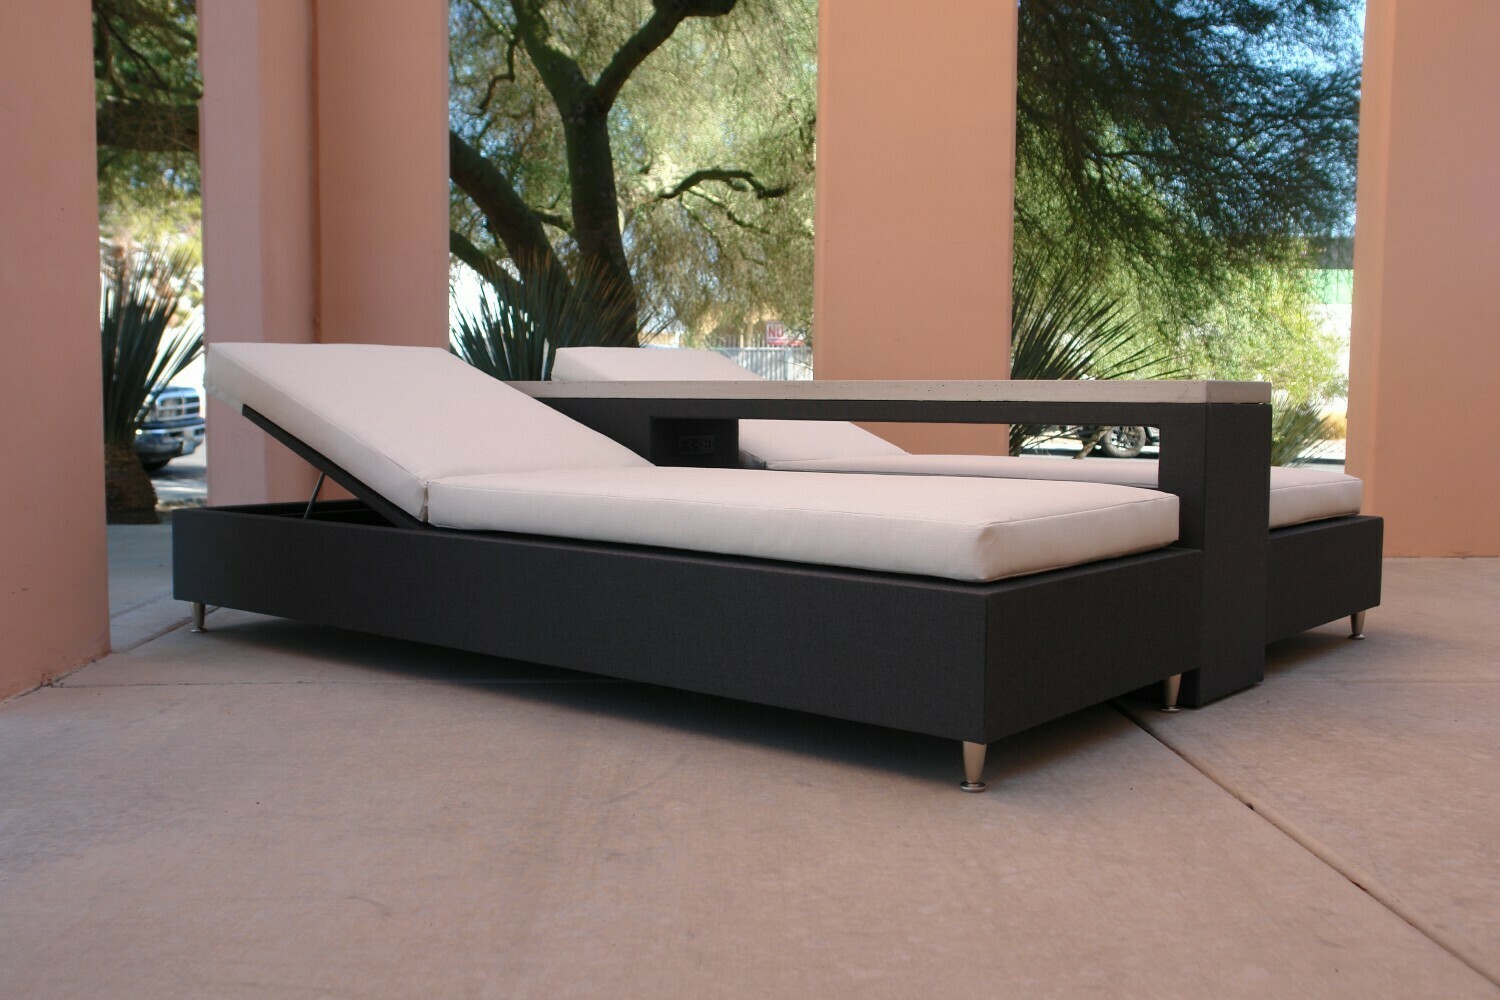 Resort Style 3 Piece Lounging Set-2 Adjustable Daybeds with Tight Seated Cushions and Concrete Lounger Table with Shelf